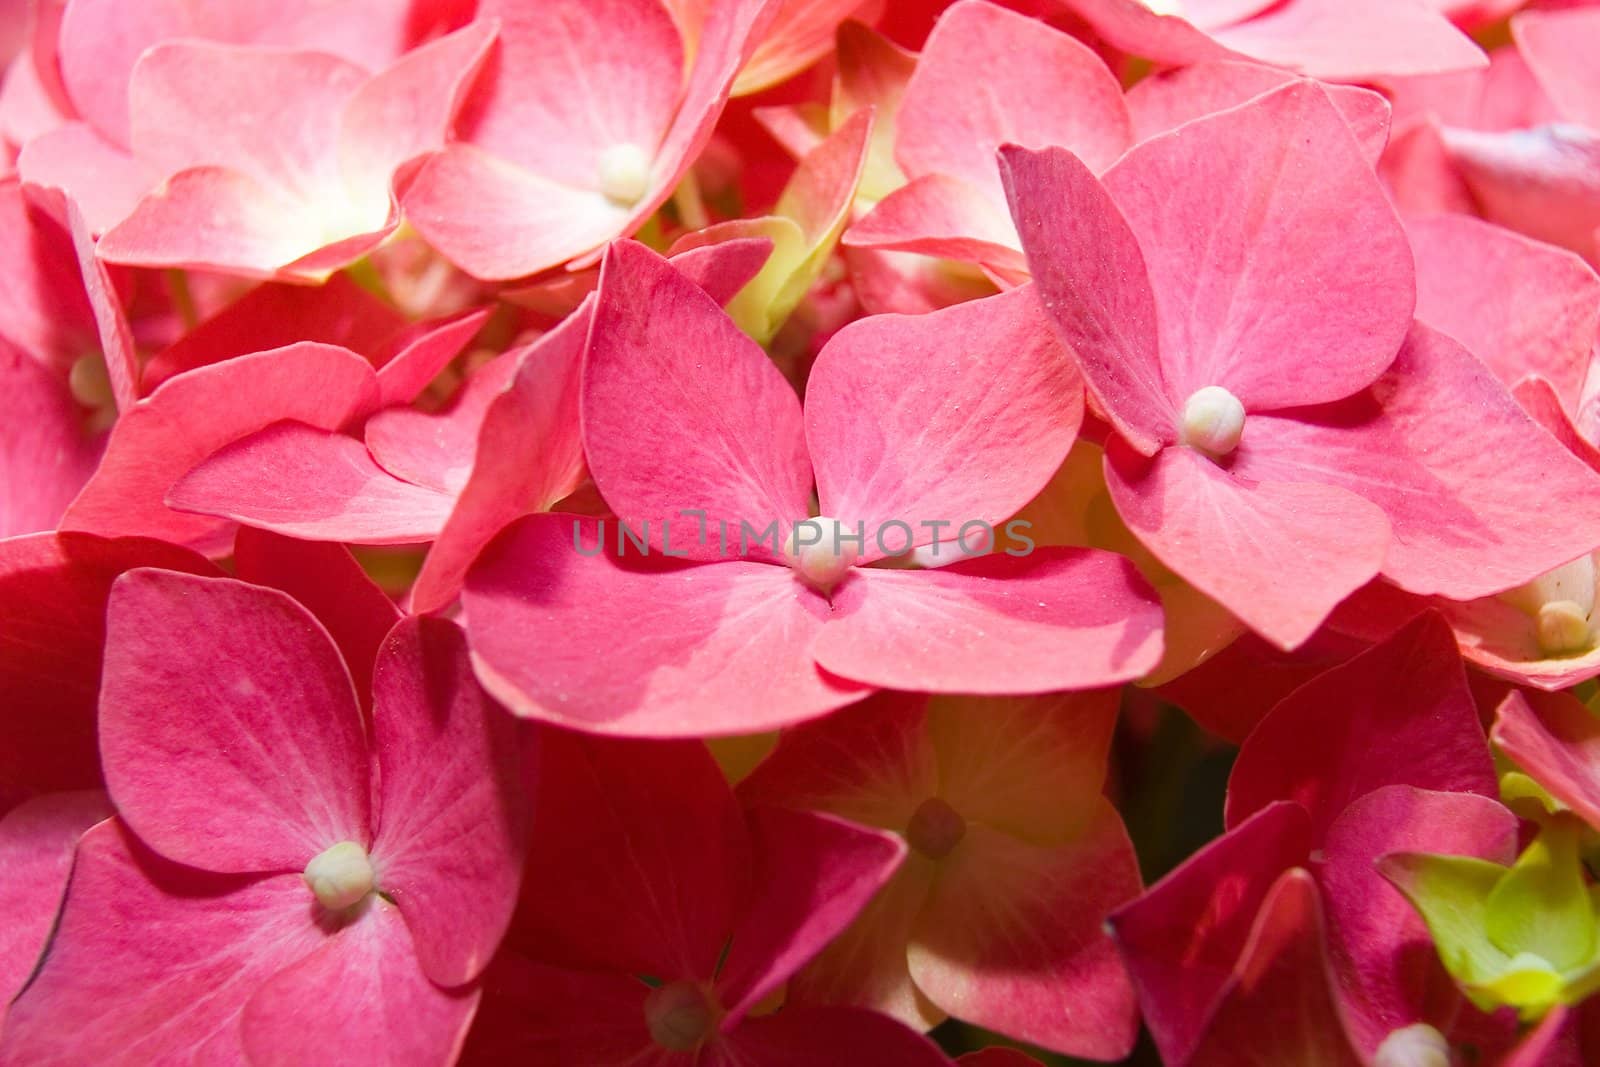 The flowers of a pink hydrangea (Hortensia ) photographed close up